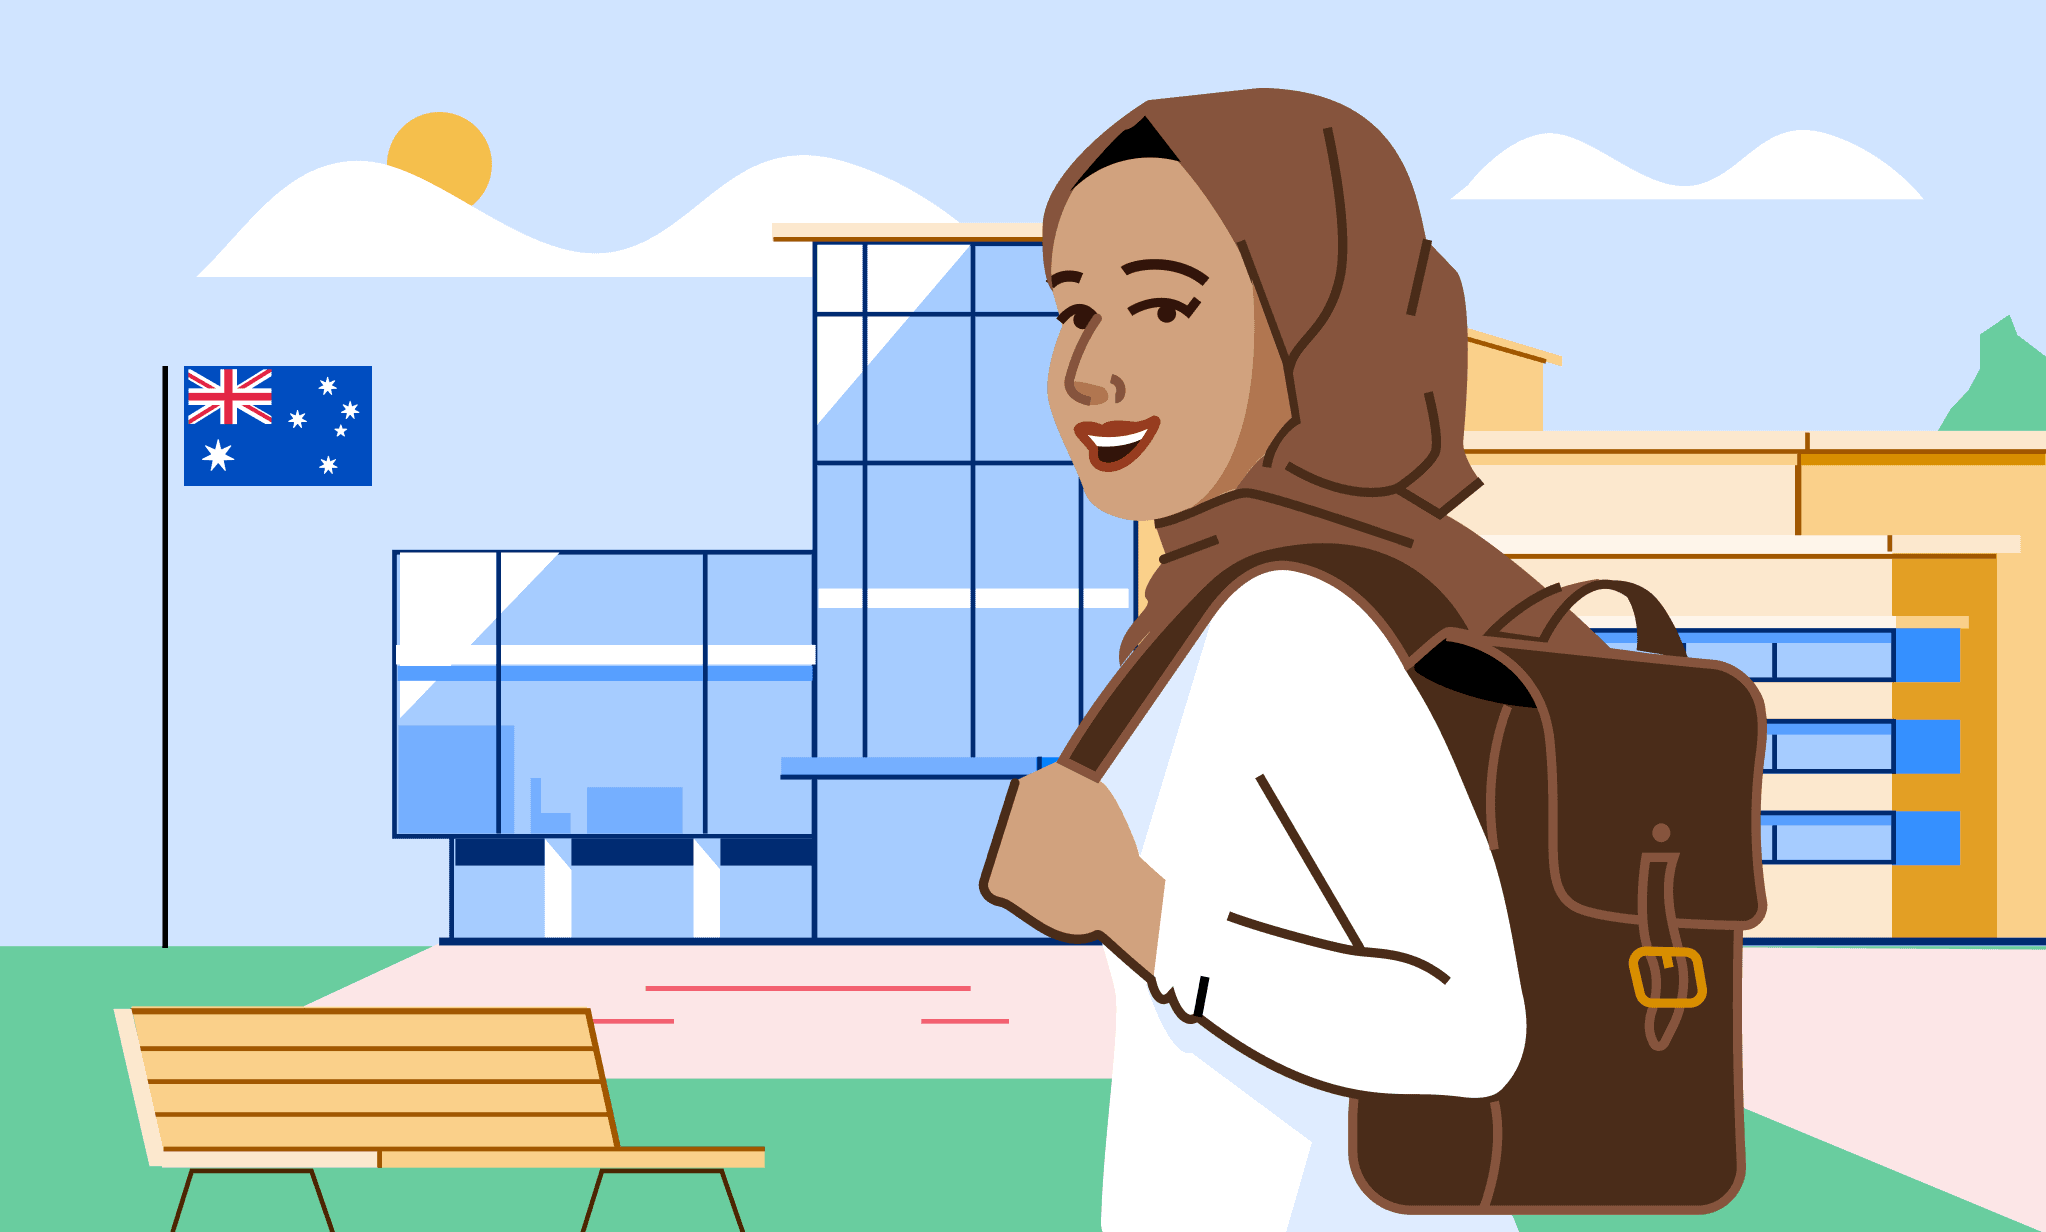 An illustration of a woman wearing a hijab and a white shirt, carrying a backpack, stands in front of a glass school building which is flying an Australian flag.